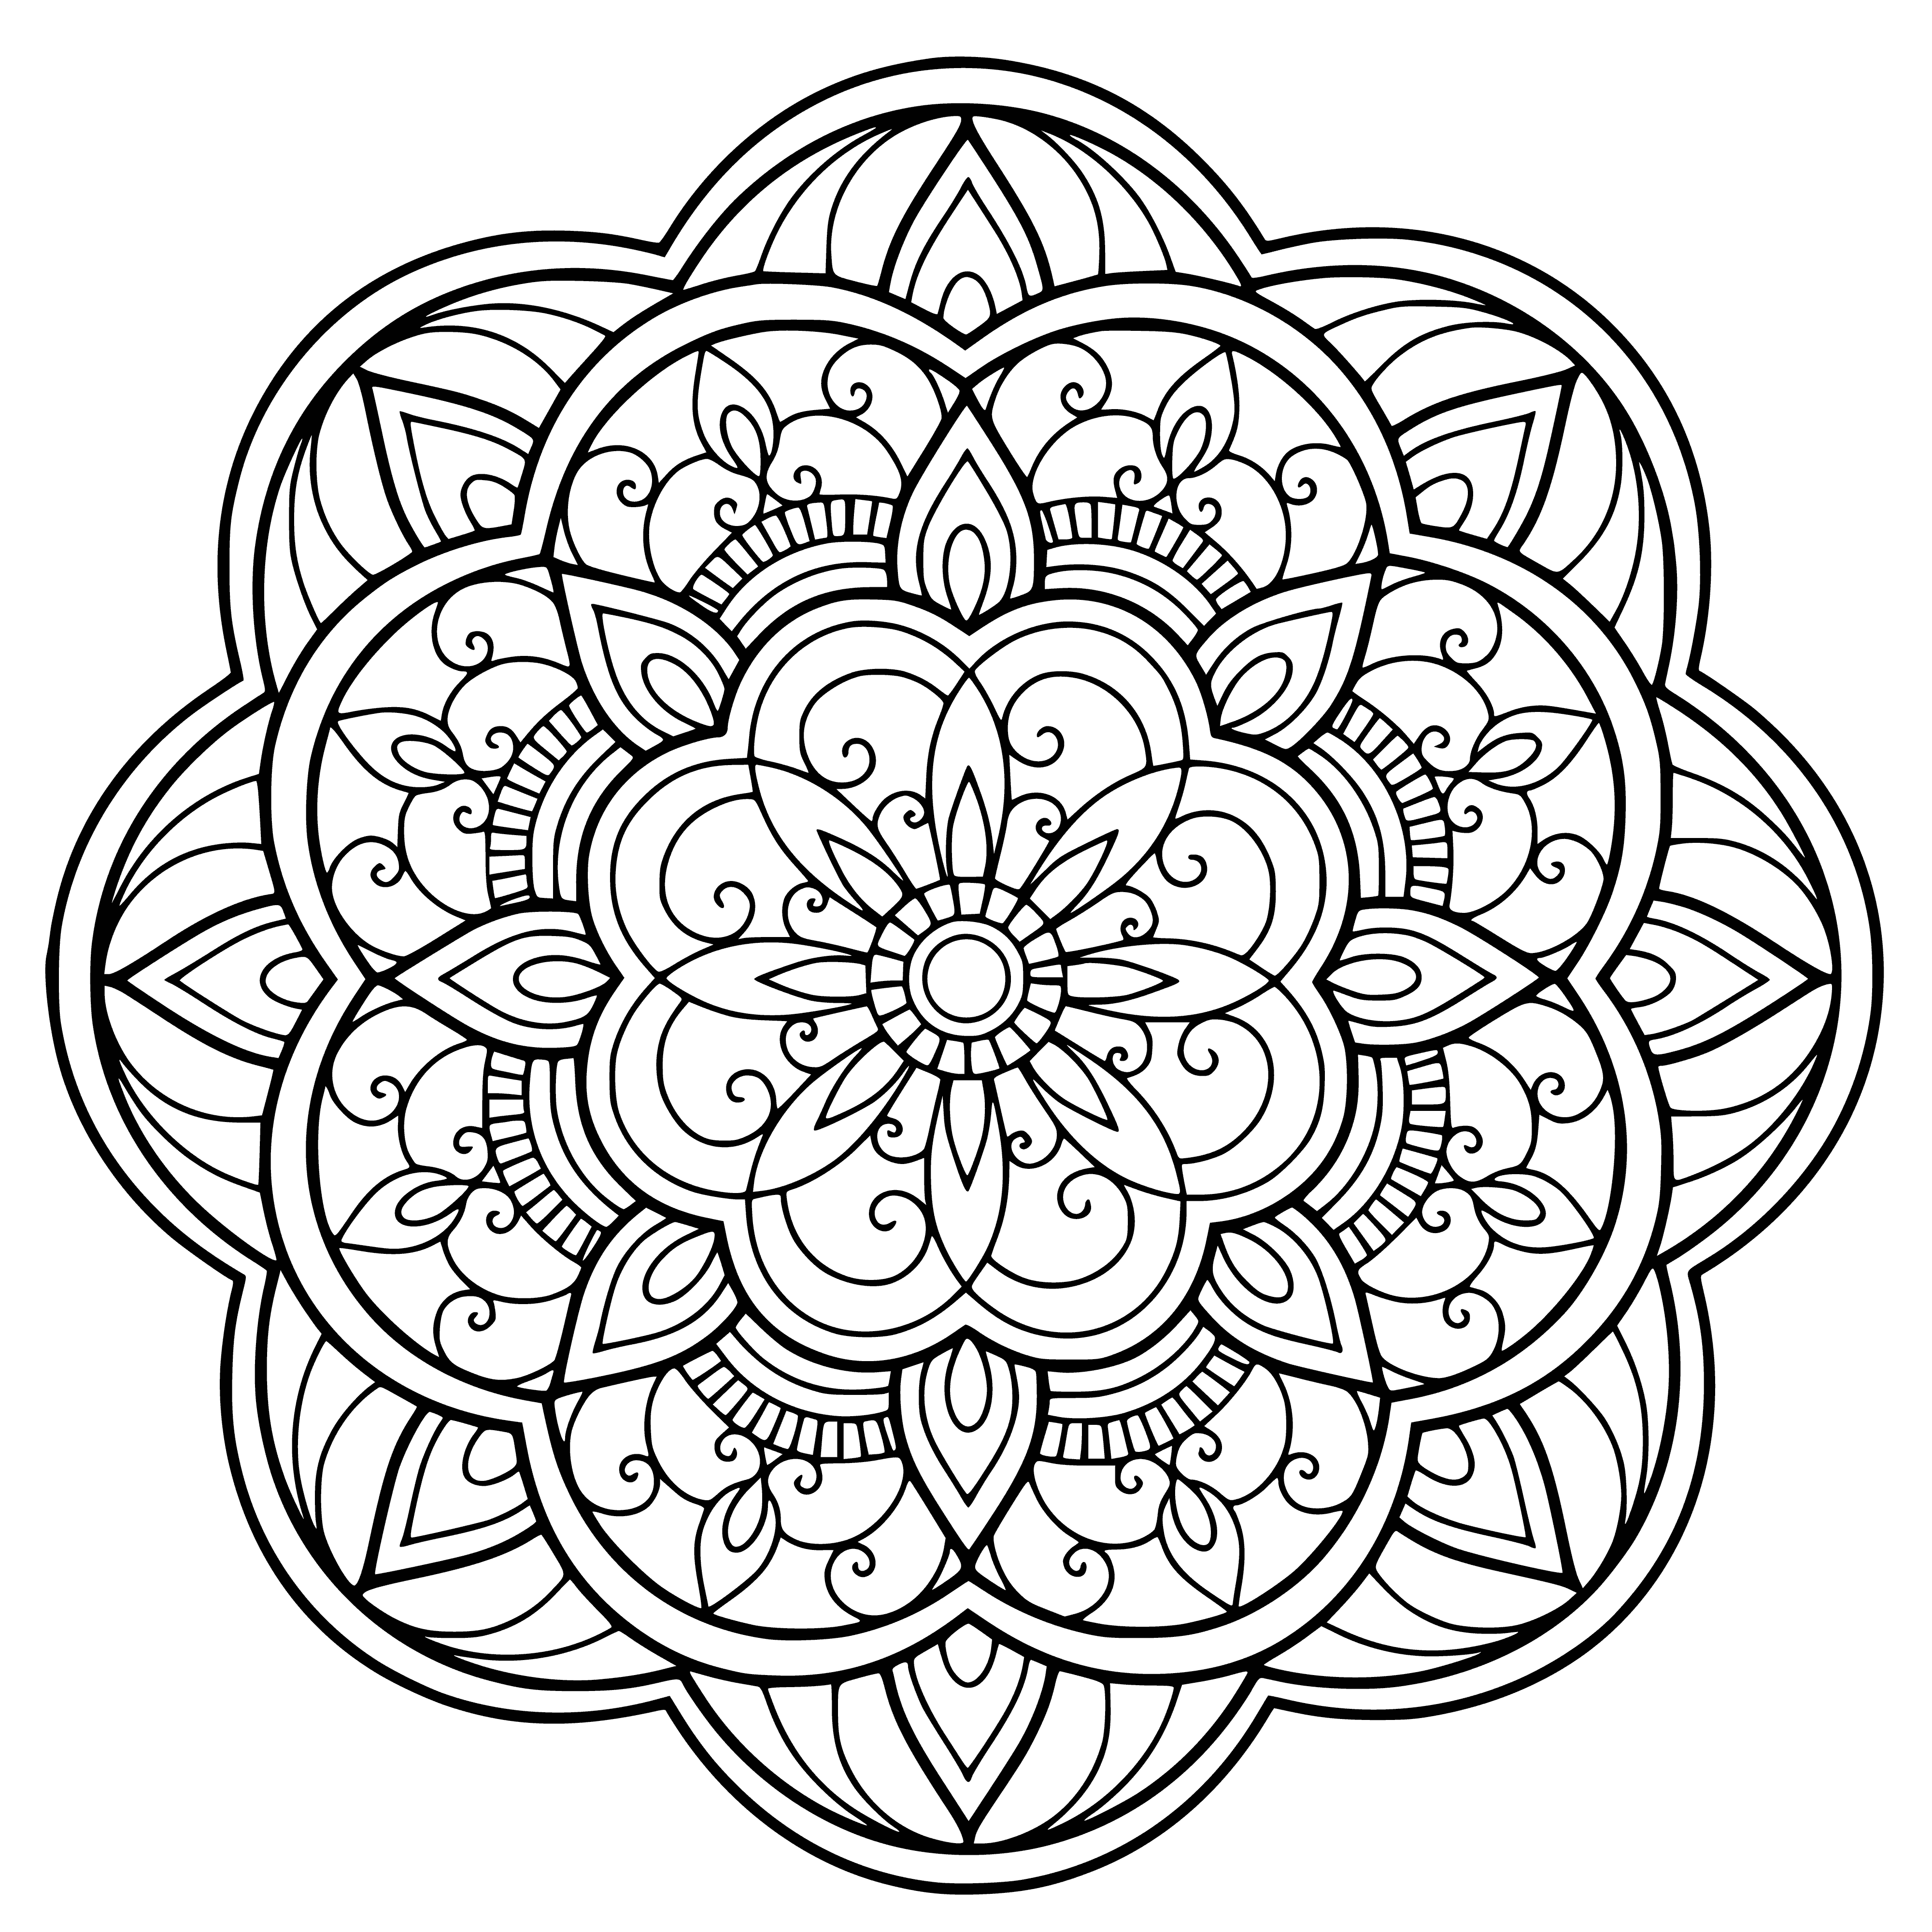 coloring page: A flower mandala symmetrical in design w/center pt. Flowers of blue, purple, pink & white, some w/patterns, others solid. Leaves & vines entwined.